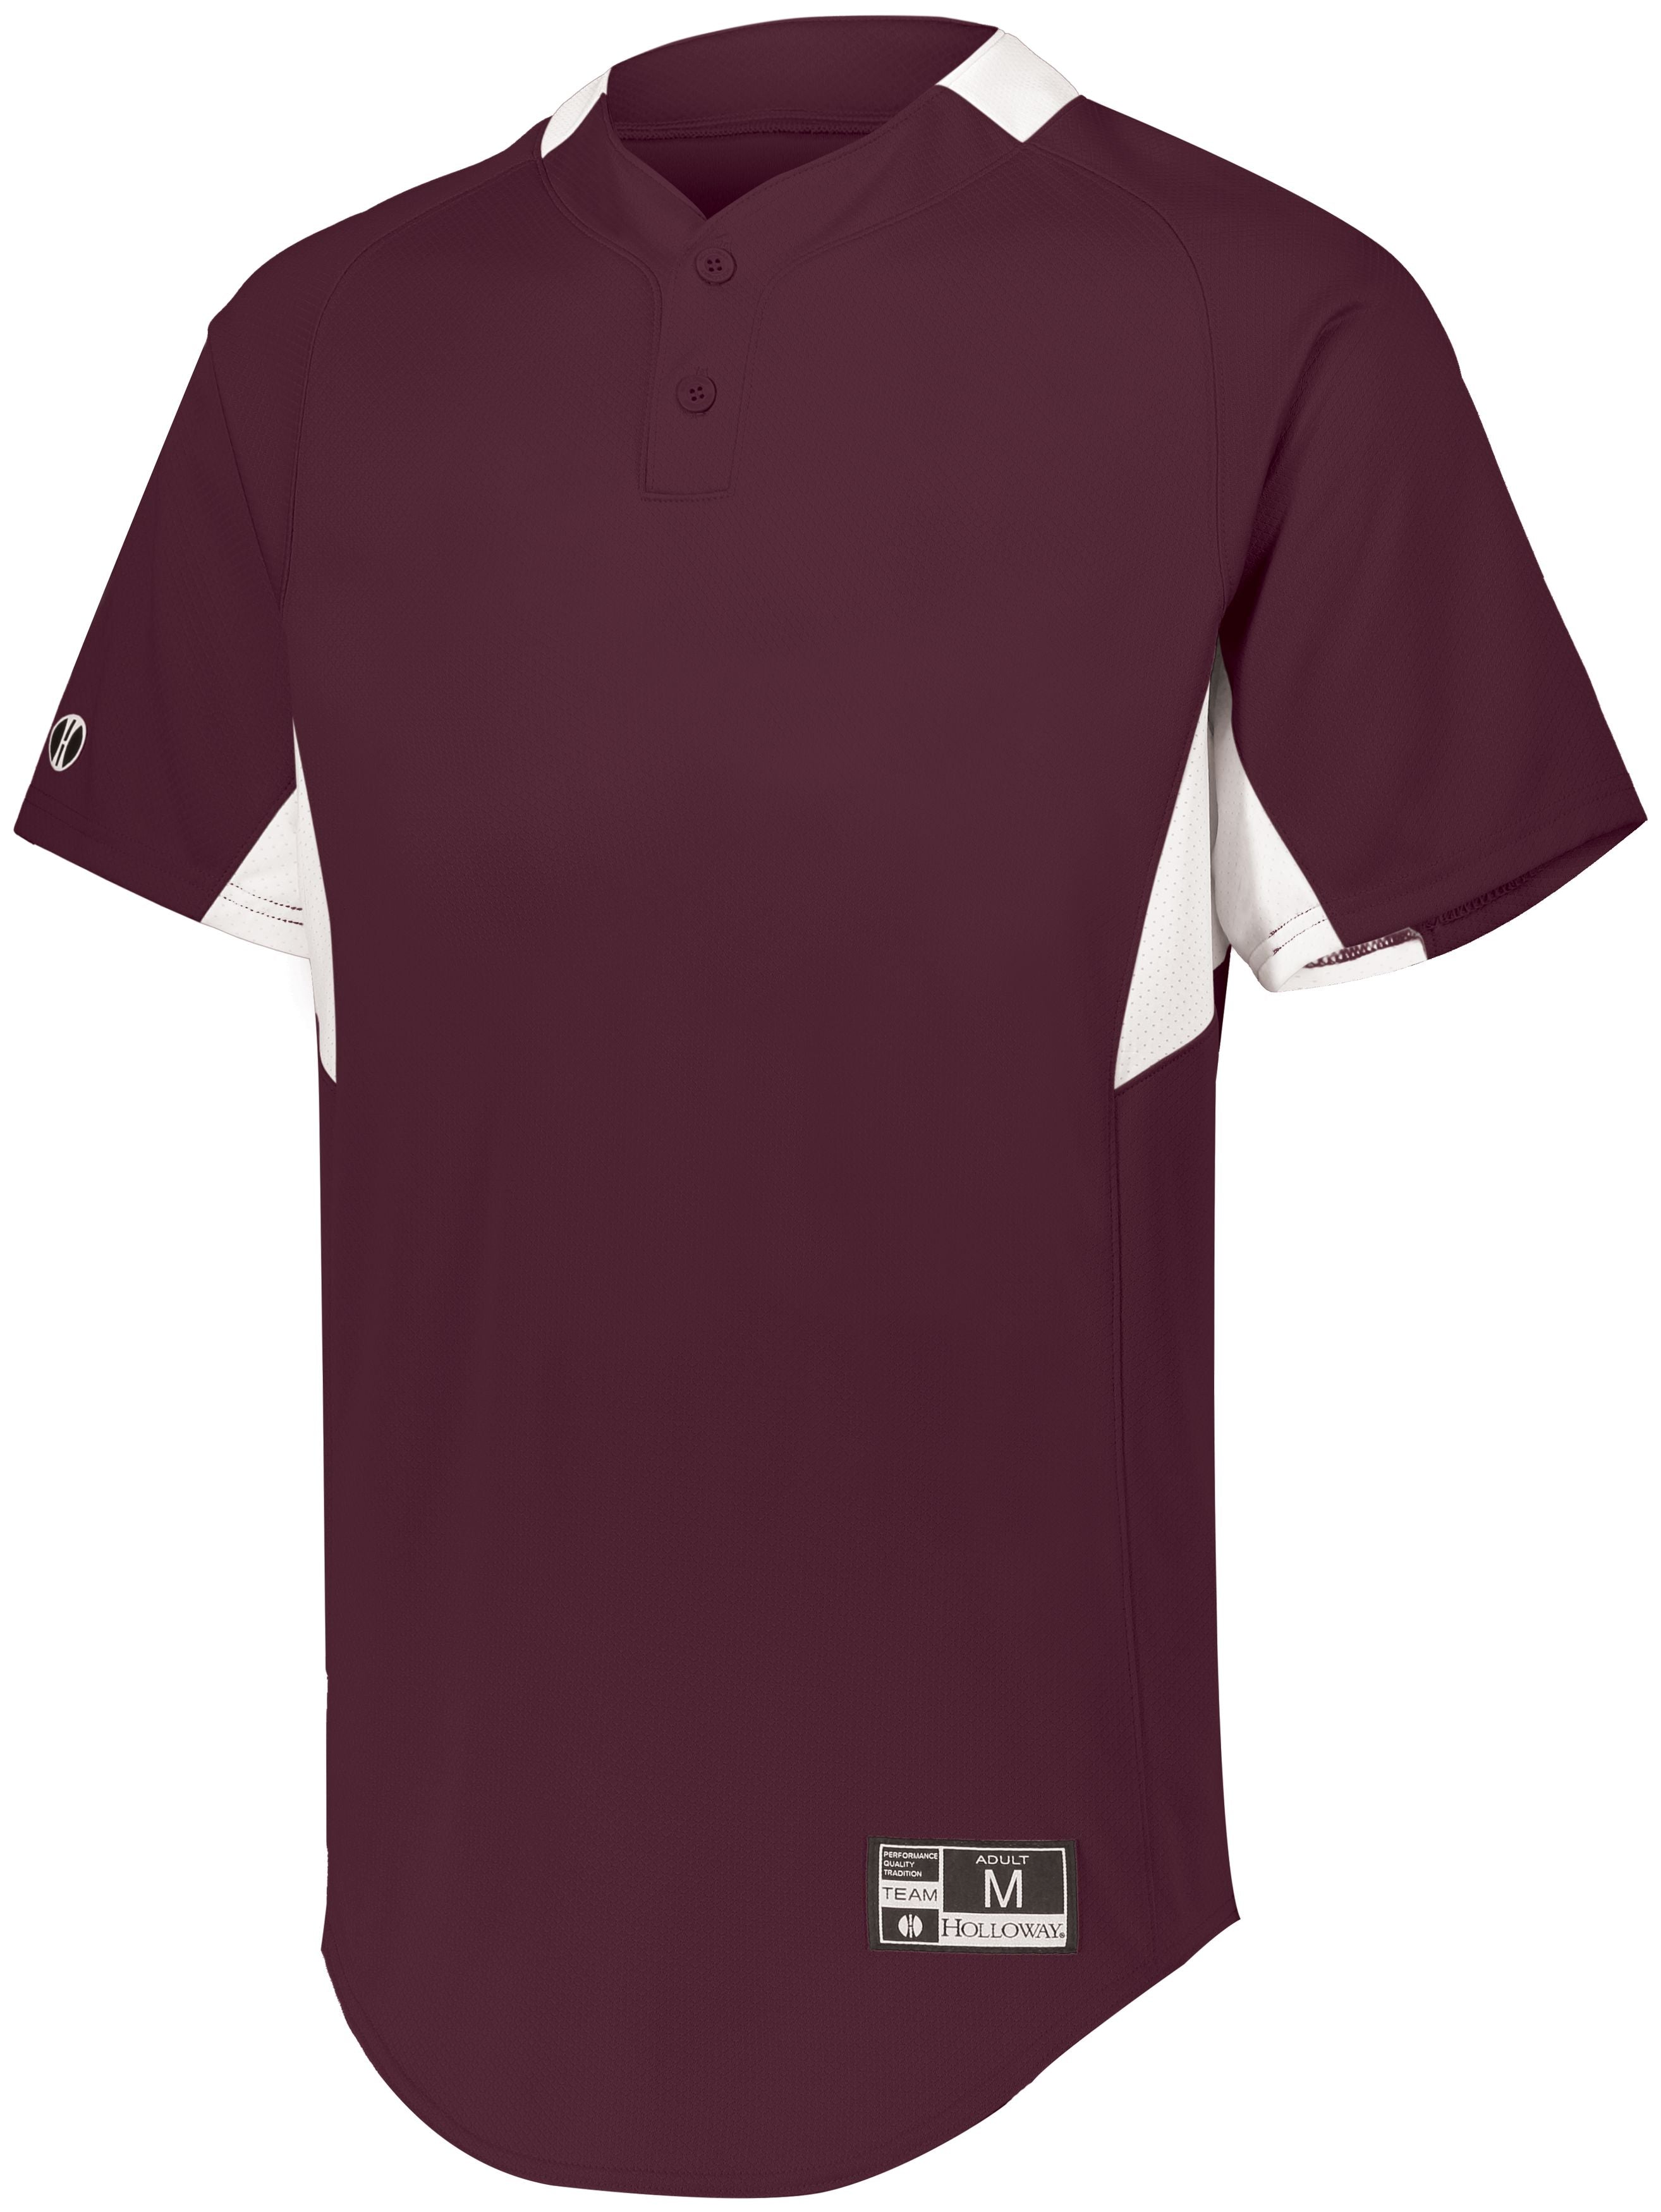 Holloway Youth  Game7 Two-Button Baseball Jersey in Maroon/White  -Part of the Youth, Youth-Jersey, Baseball, Holloway, Shirts, All-Sports, All-Sports-1 product lines at KanaleyCreations.com